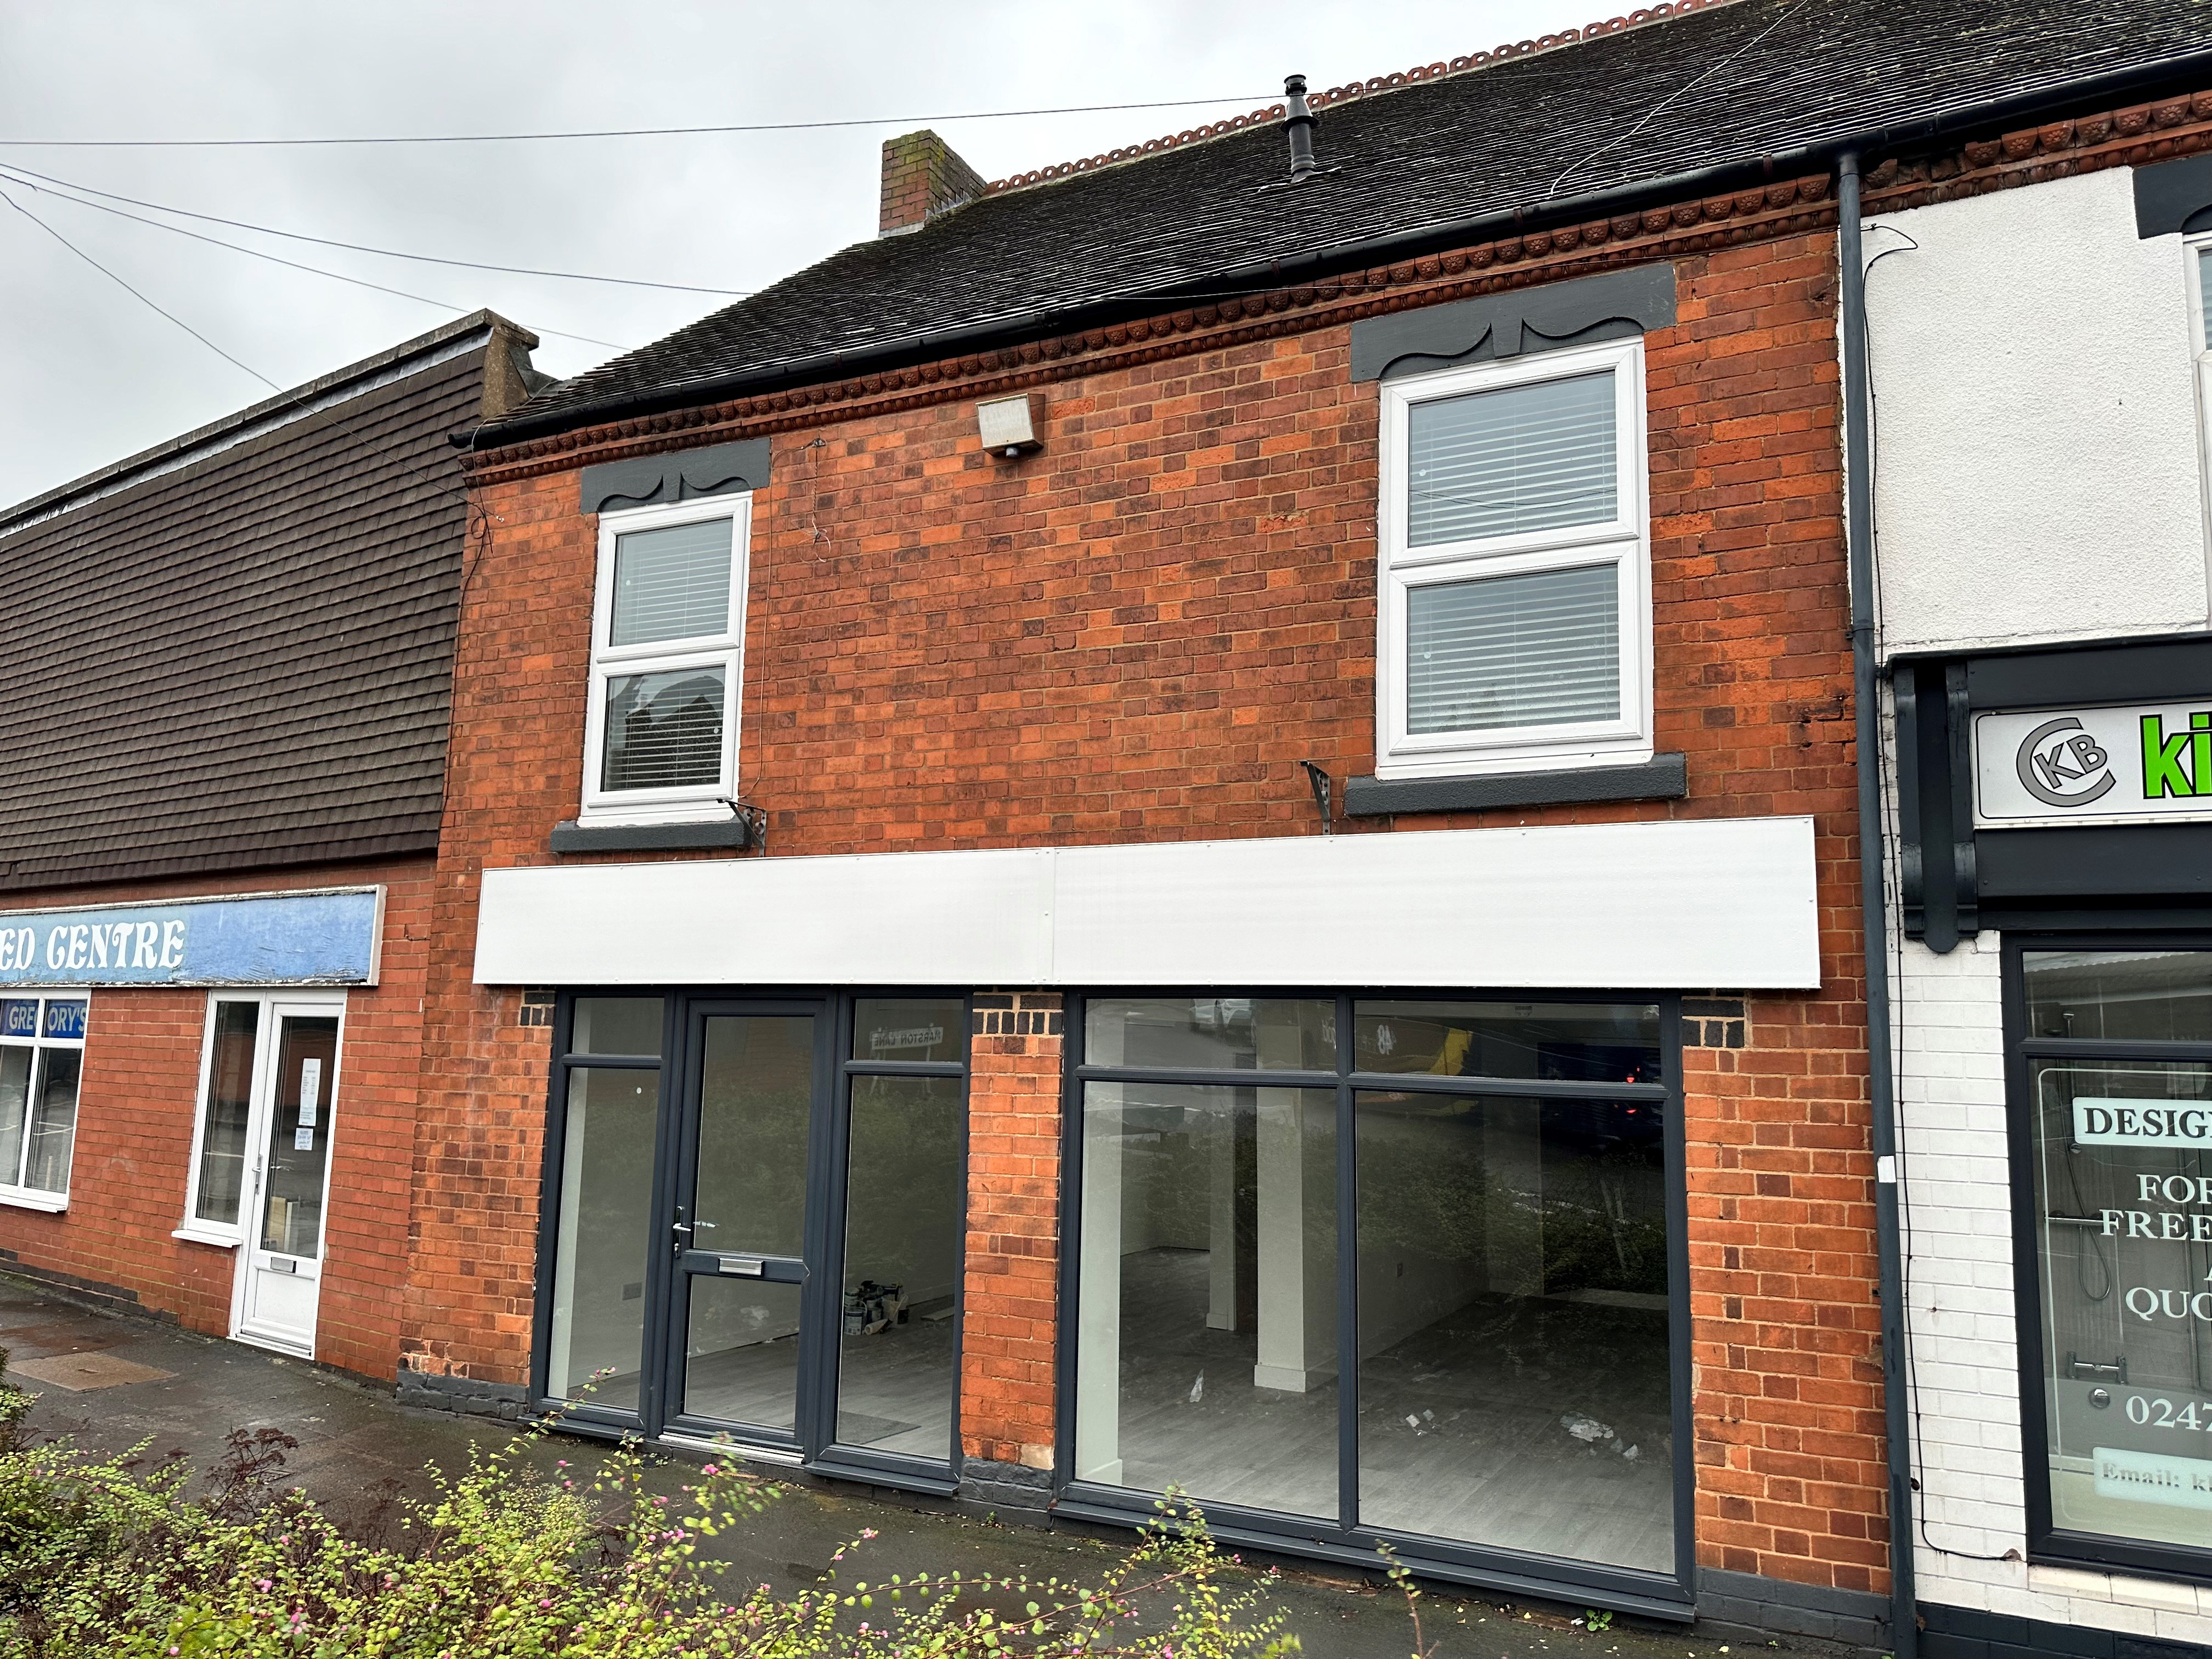 0 bed Retail Property (High Street) for rent in Nuneaton. From Cartwright Hands - Commercial